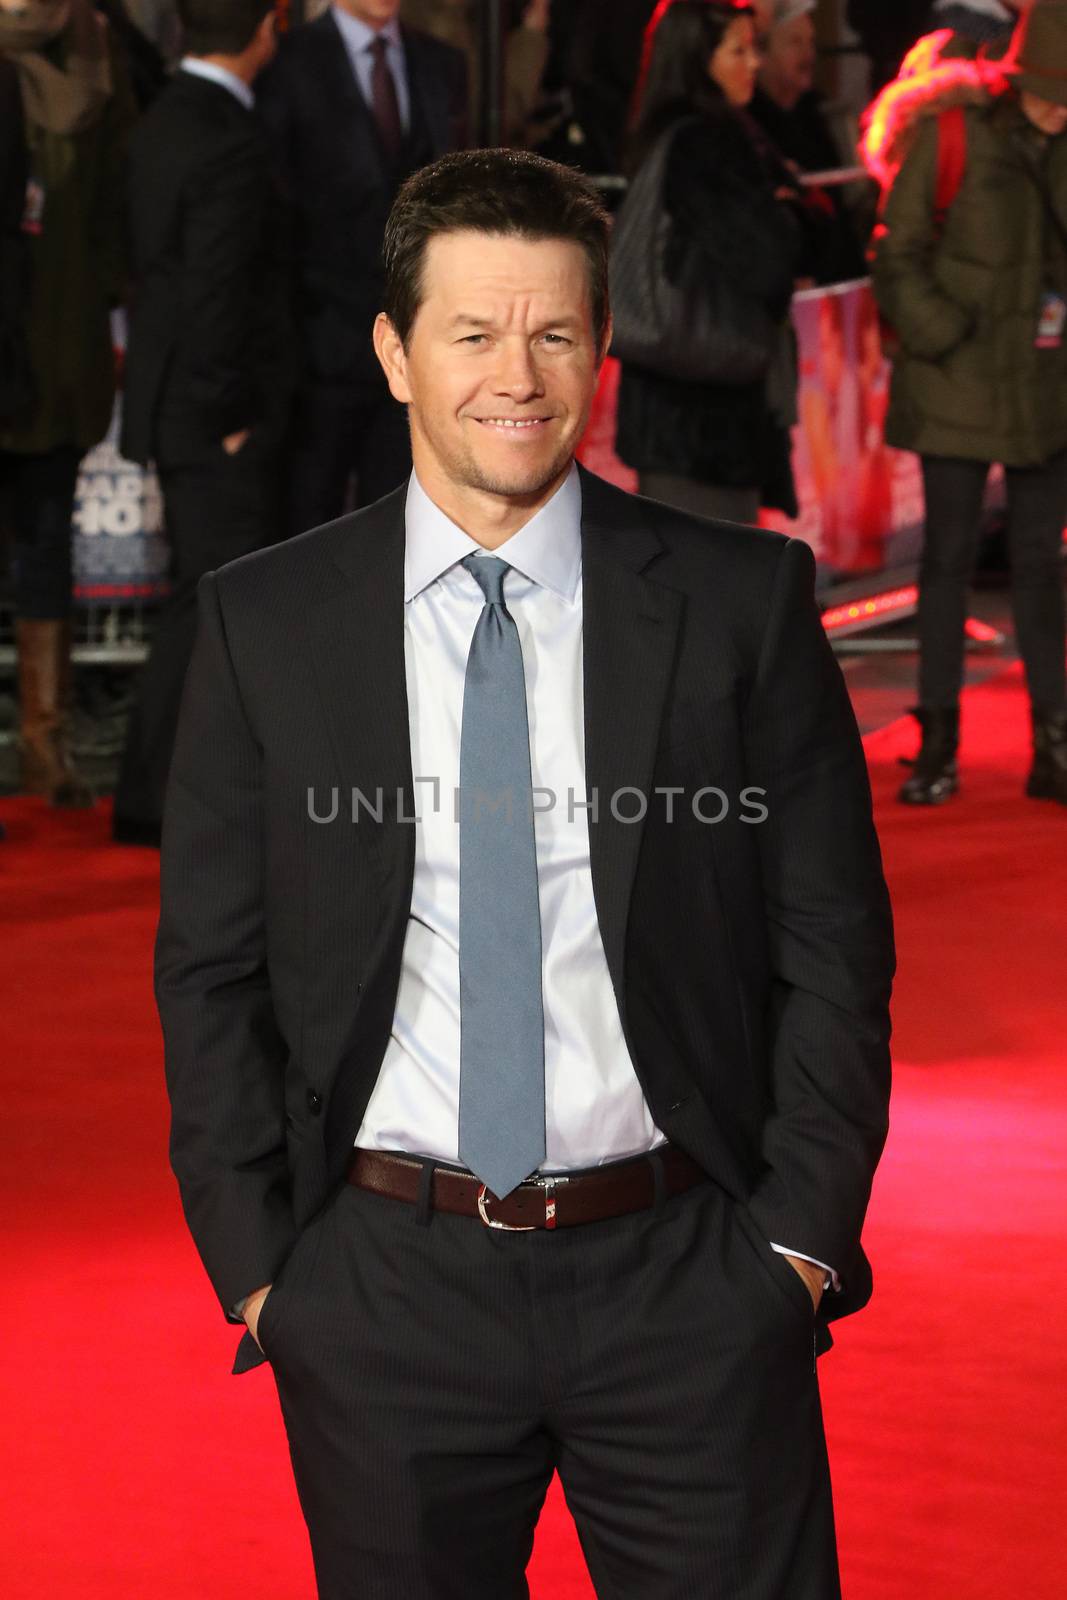 UK, London: Mark Wahlberg hits the red carpet at Leicester Square in London on December 9, 2015 for the premiere of his new film, Daddy's Home.